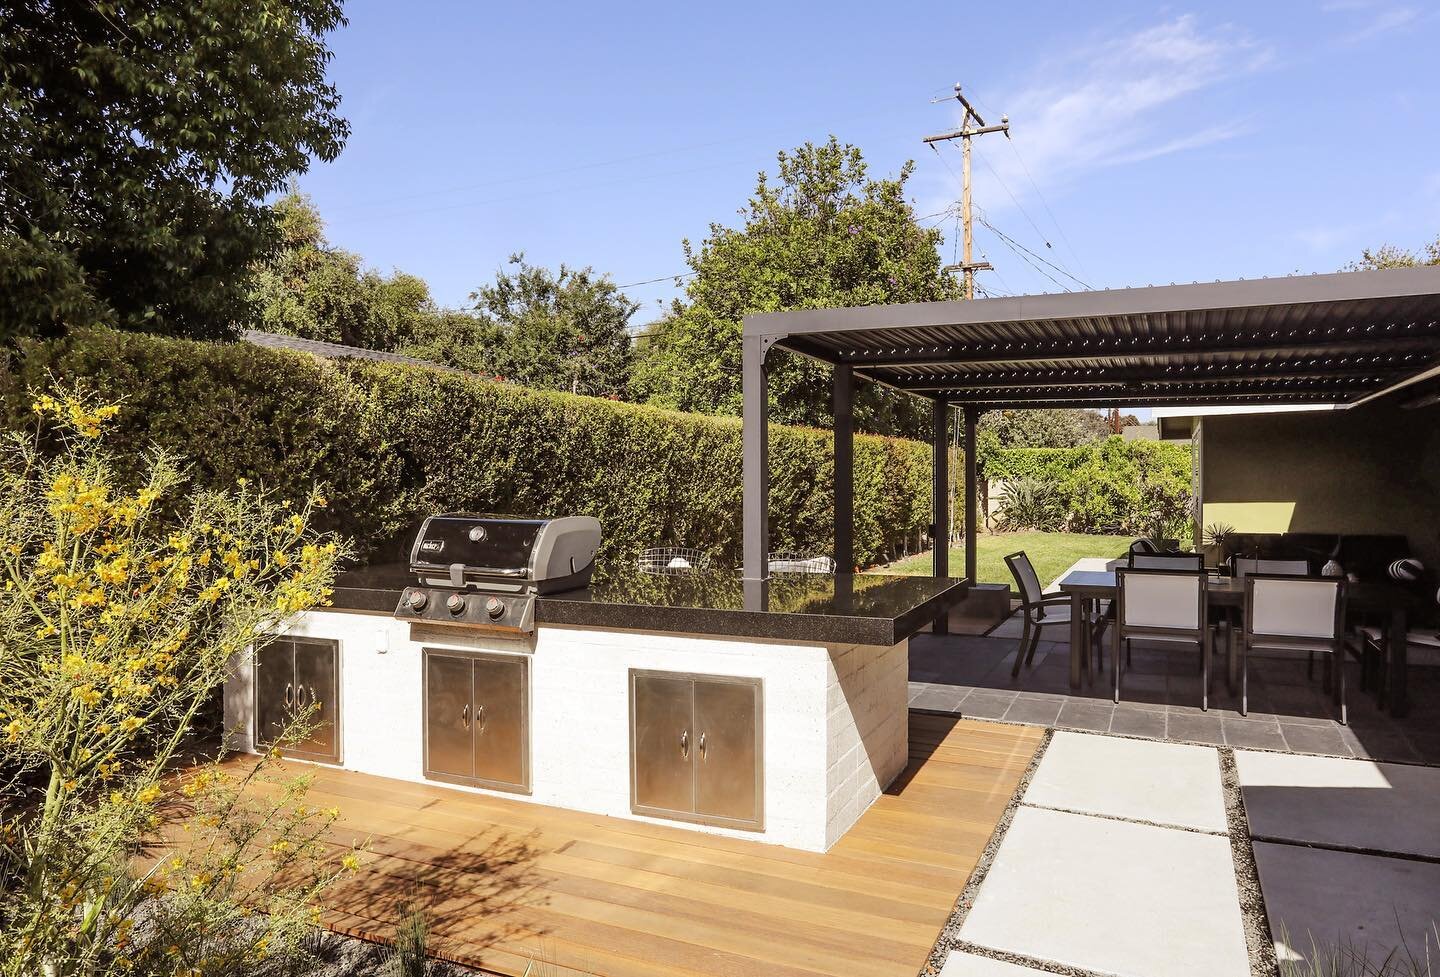 This backyard is 🔥but we&rsquo;re not feeling the heat under this sleek shade structure. Happy Monday people.